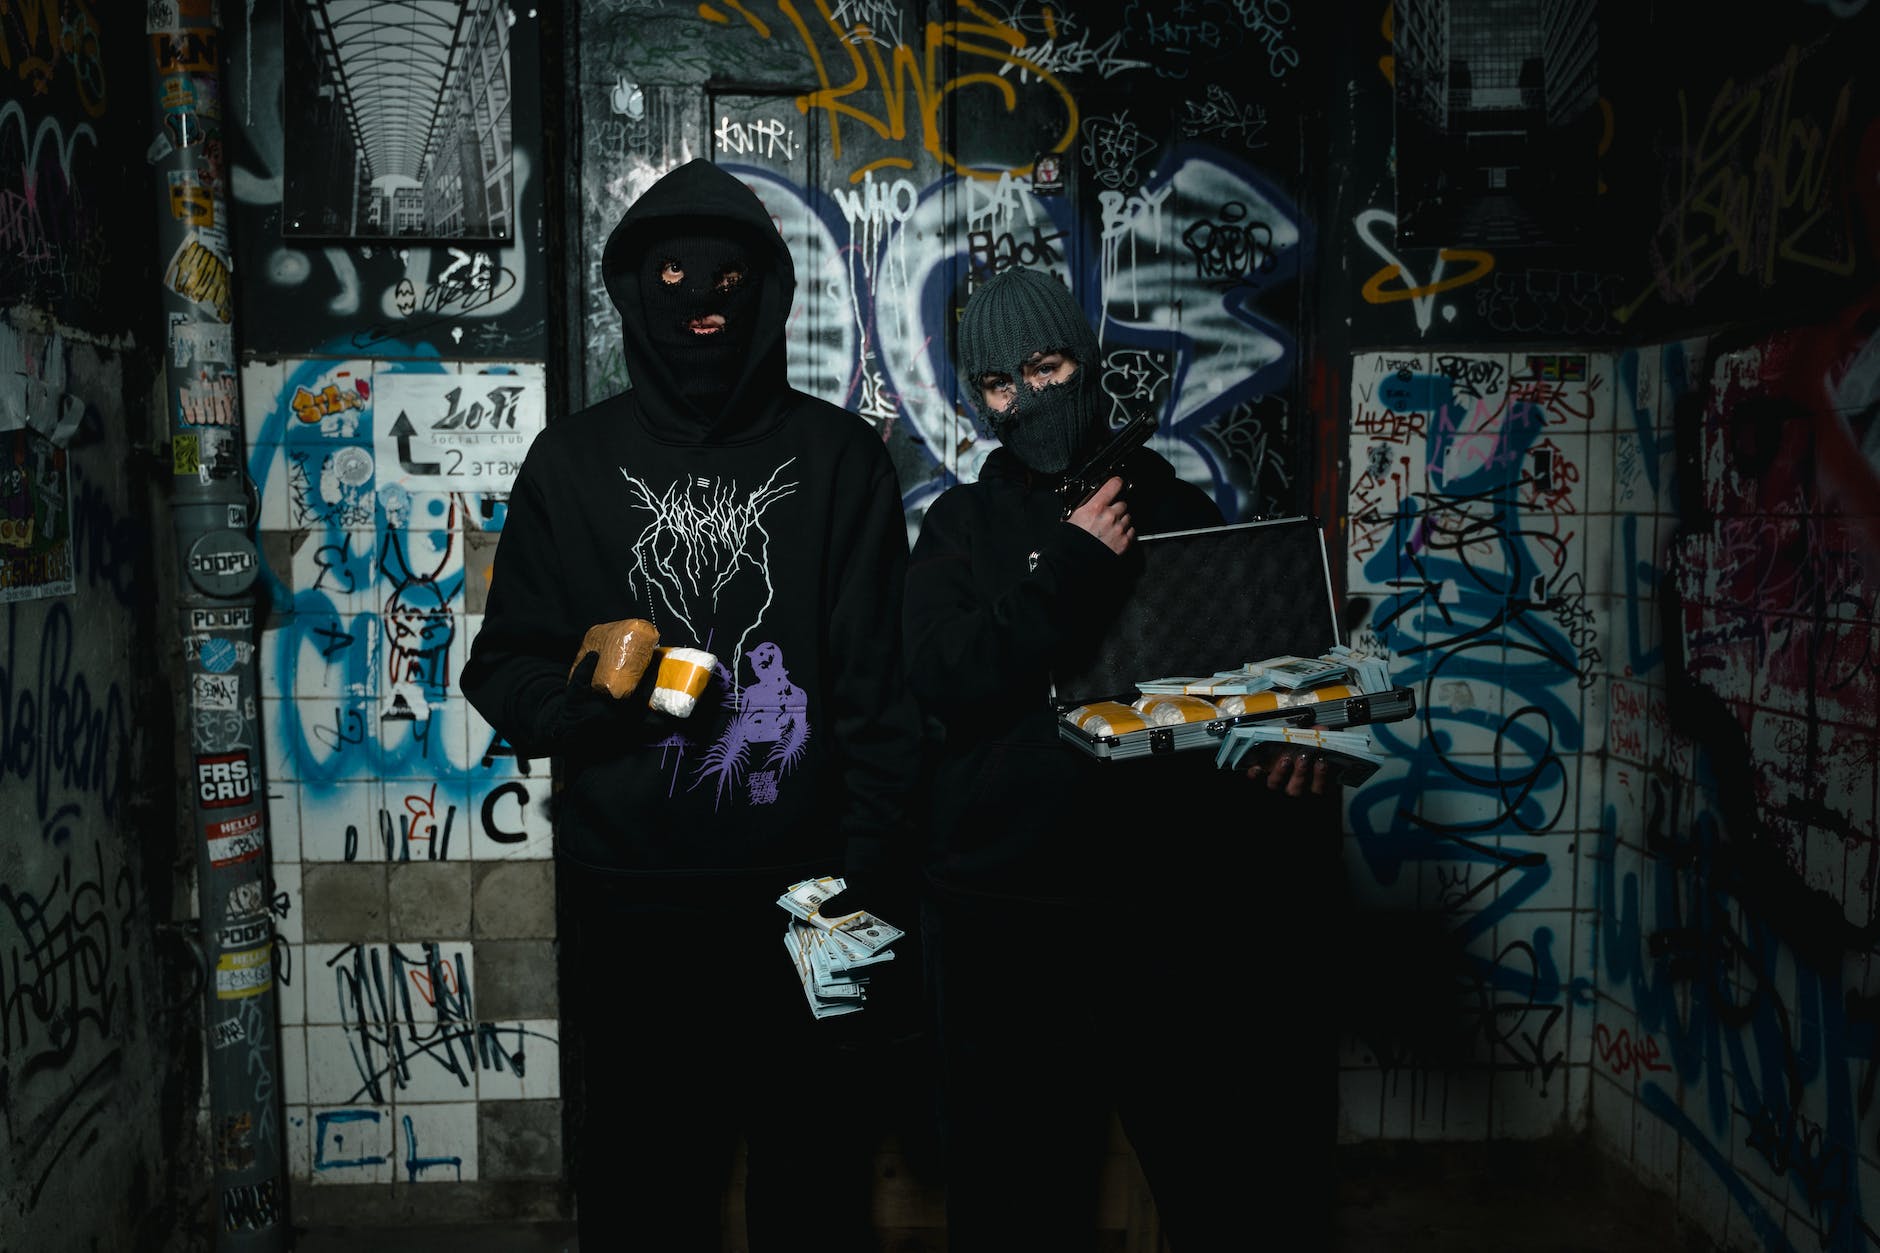 two people in black hoodie standing beside a wall with graffiti holding cash money